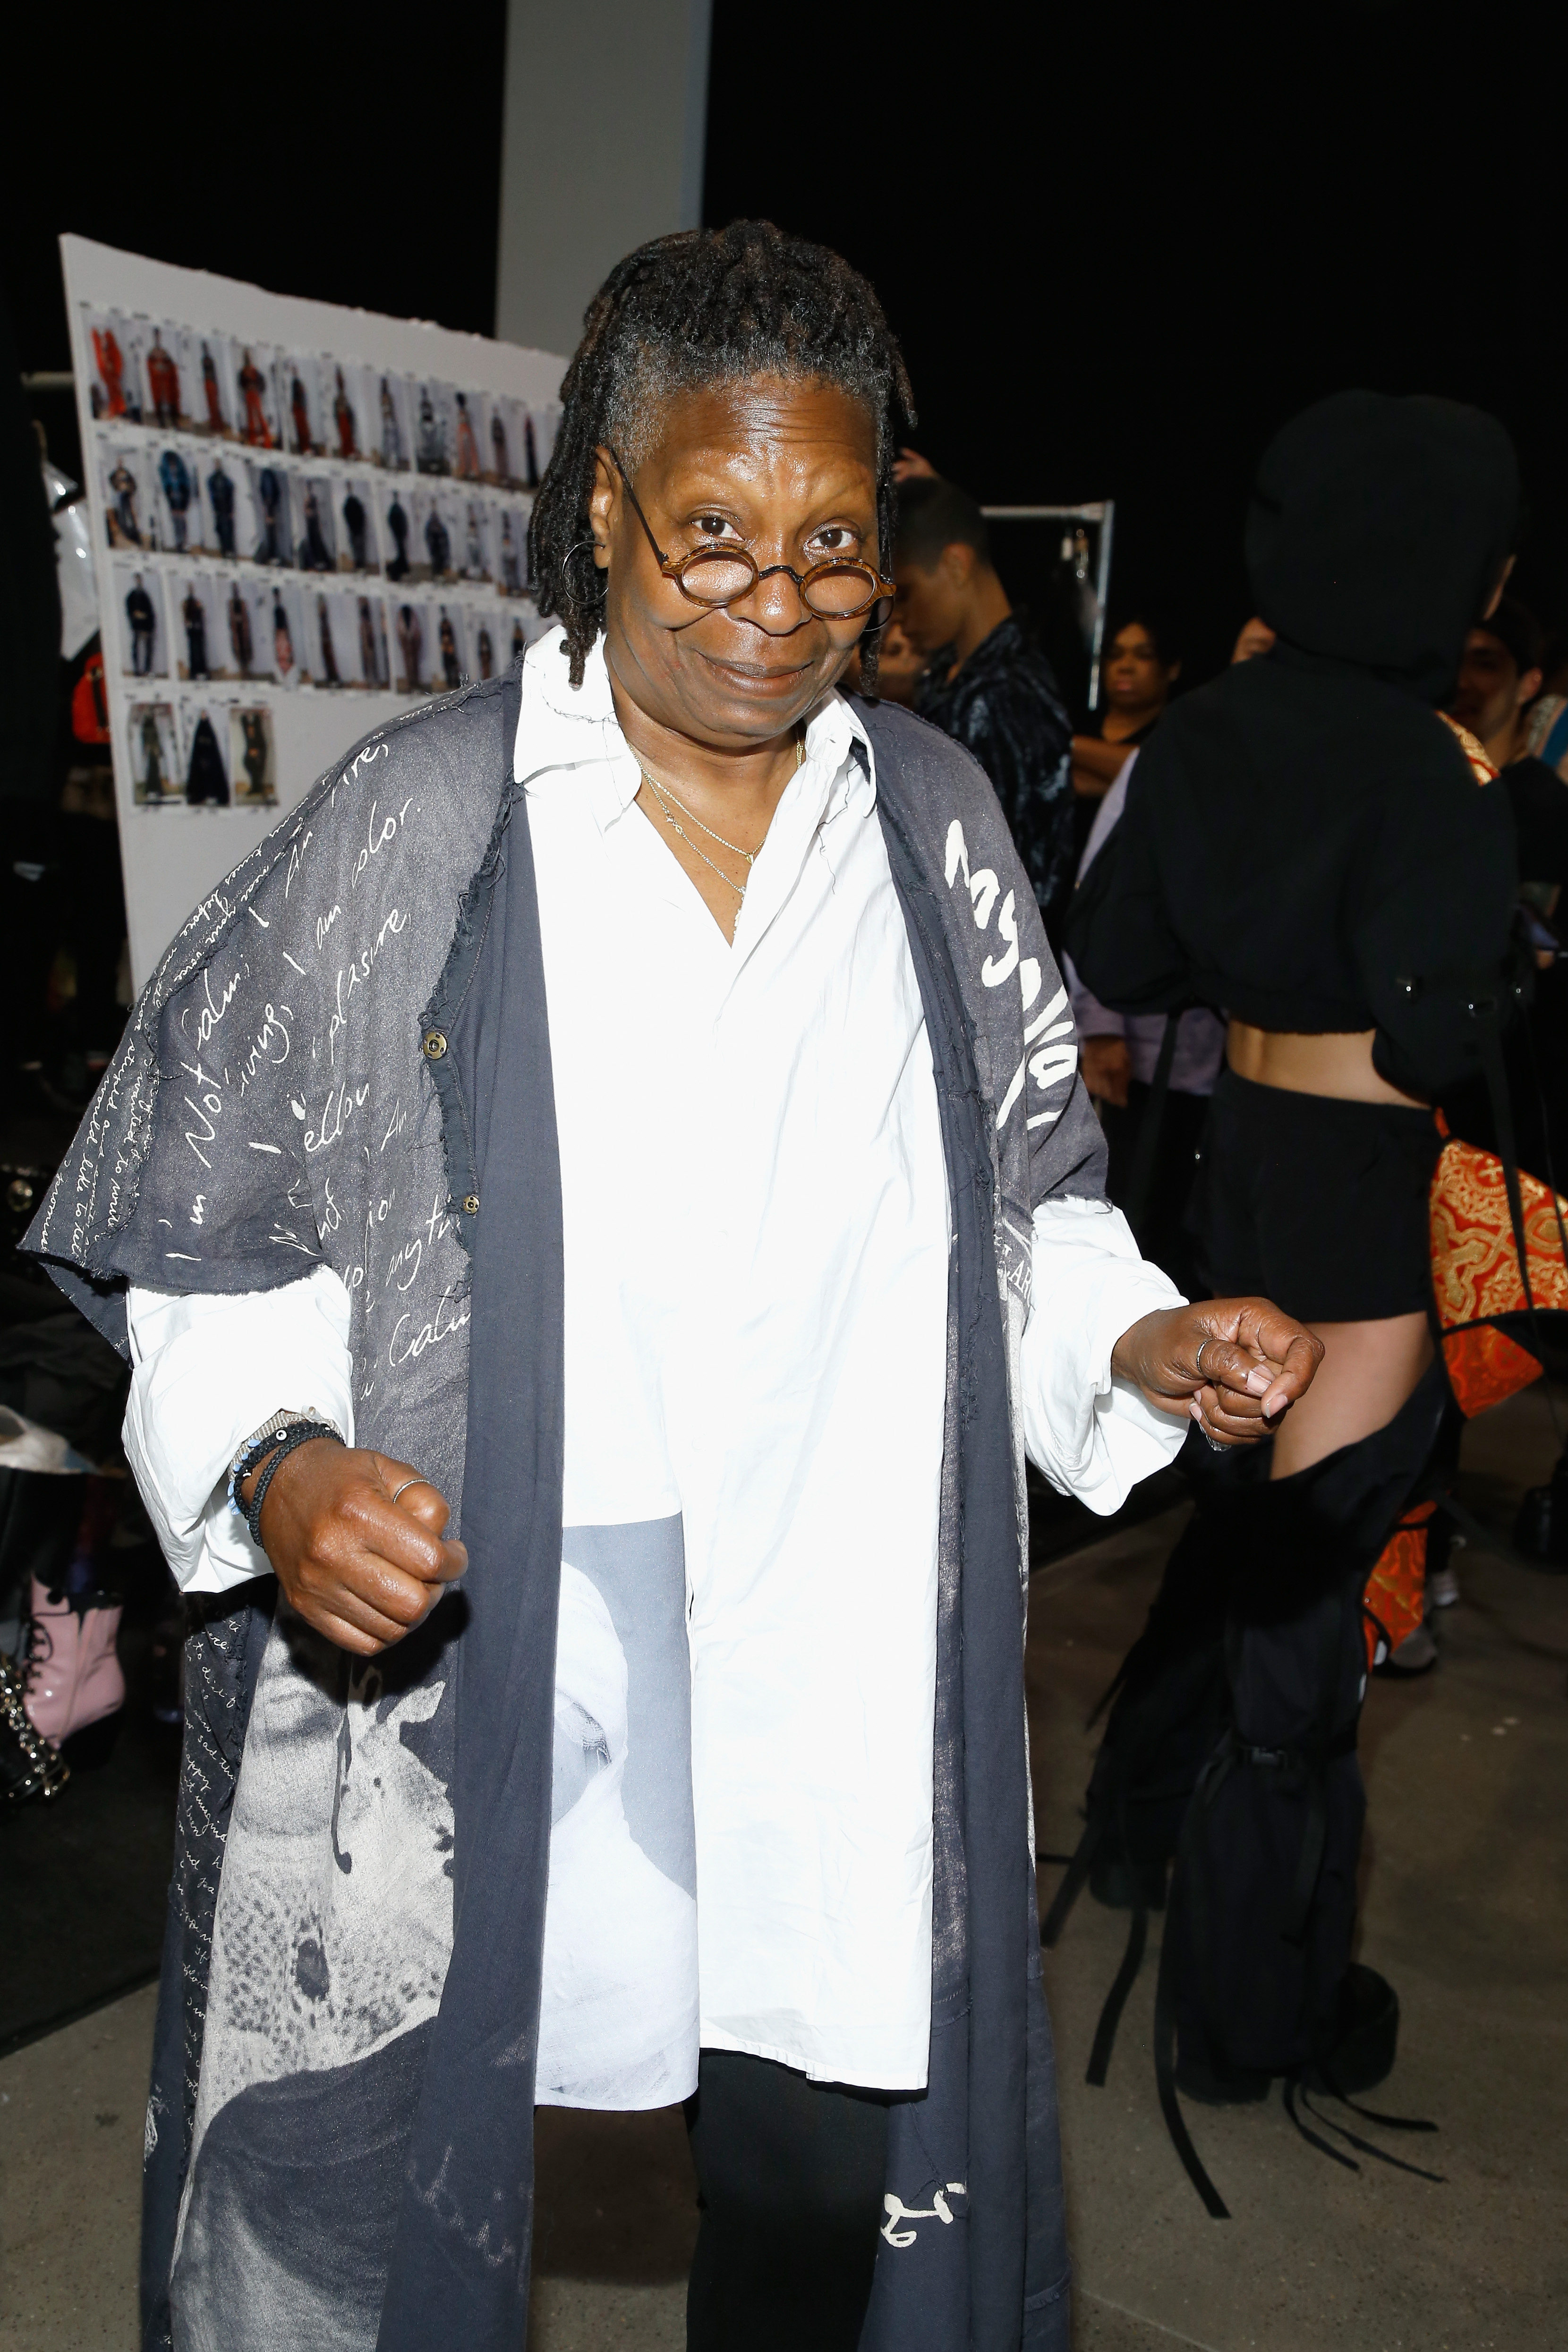 NEW YORK, NY - SEPTEMBER 11: Whoopi Goldberg attends the Hogan McLaughlin front Row during New York Fashion Week: The Shows at Gallery II at Spring Studios on September 11, 2018 in New York City. (Photo by John Lamparski/Getty Images for NYFW: The Shows)